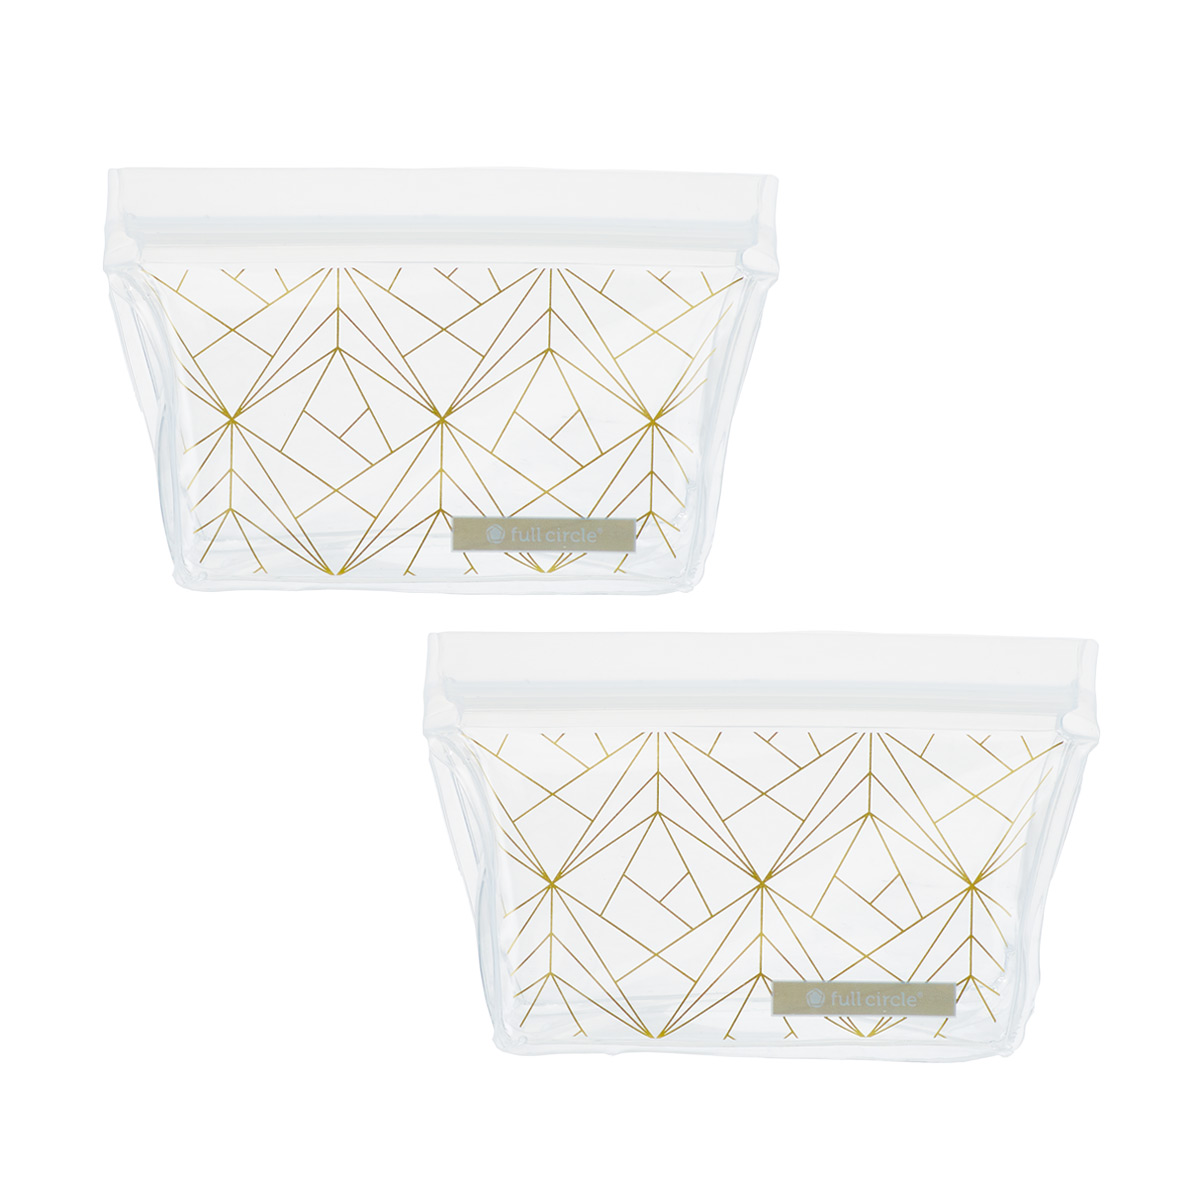 https://www.containerstore.com/catalogimages/347918/10075724-reusable-snack-bags-gold-ge.jpg